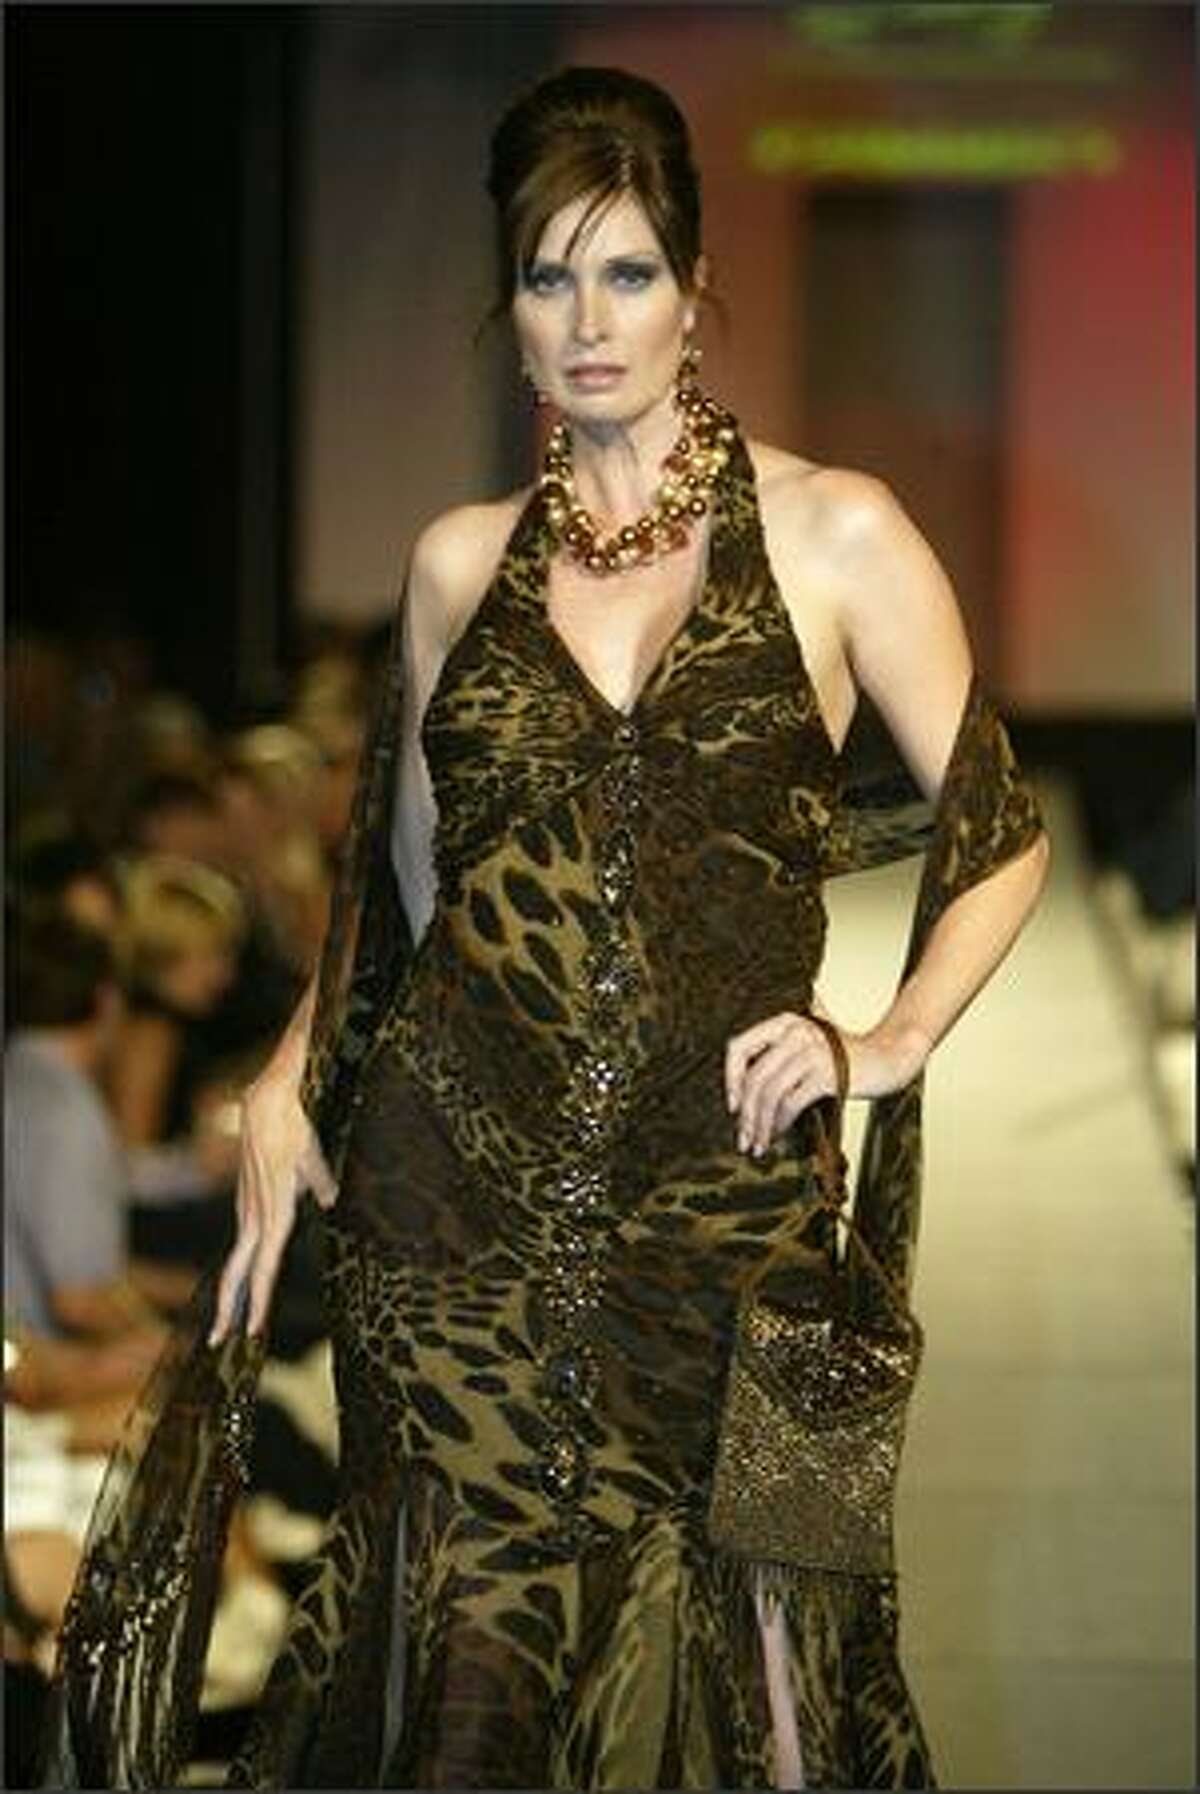 A model shows an outfit from Karan Dannenberg Clothier: Sue Wong Leopard dress, Sue Wong shawl, Susan Marsh copper necklace and shoes by Shoefly at the fall 2006 Fashion First runway show, held at the Premier night club in Sodo on Thursday, Aug. 3.